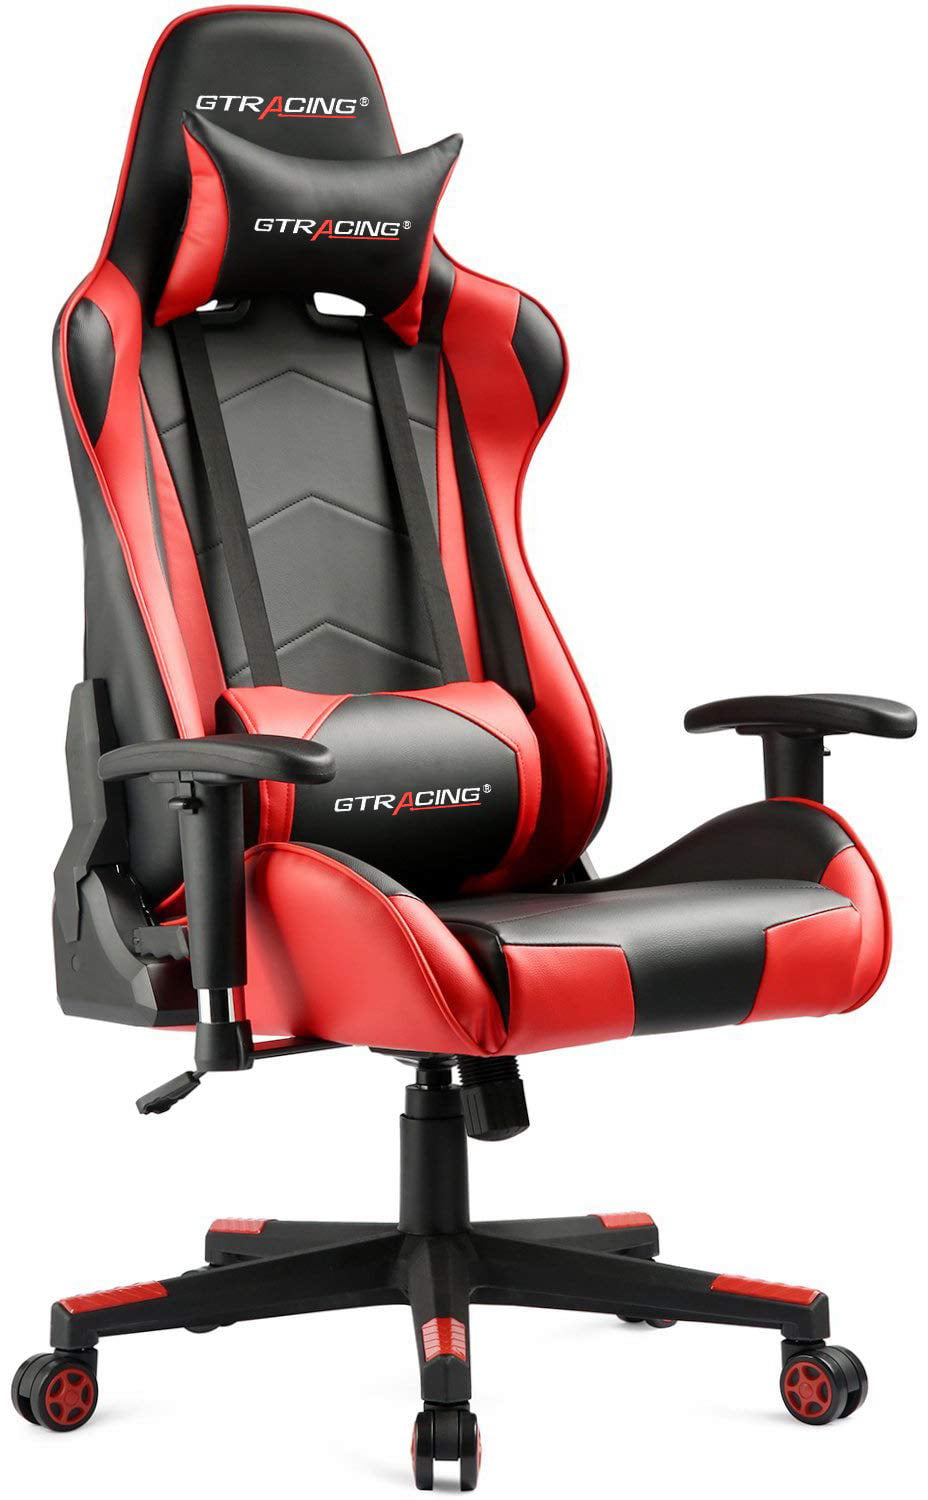 Gtracing Gaming Chair Racing Office Computer Chair Pu Leather Ergonomic Backrest And Seat Height Adjustable Recliner Swivel Rocker With Headrest And Lumbar Pillow E Sports Chair Red Walmart Canada